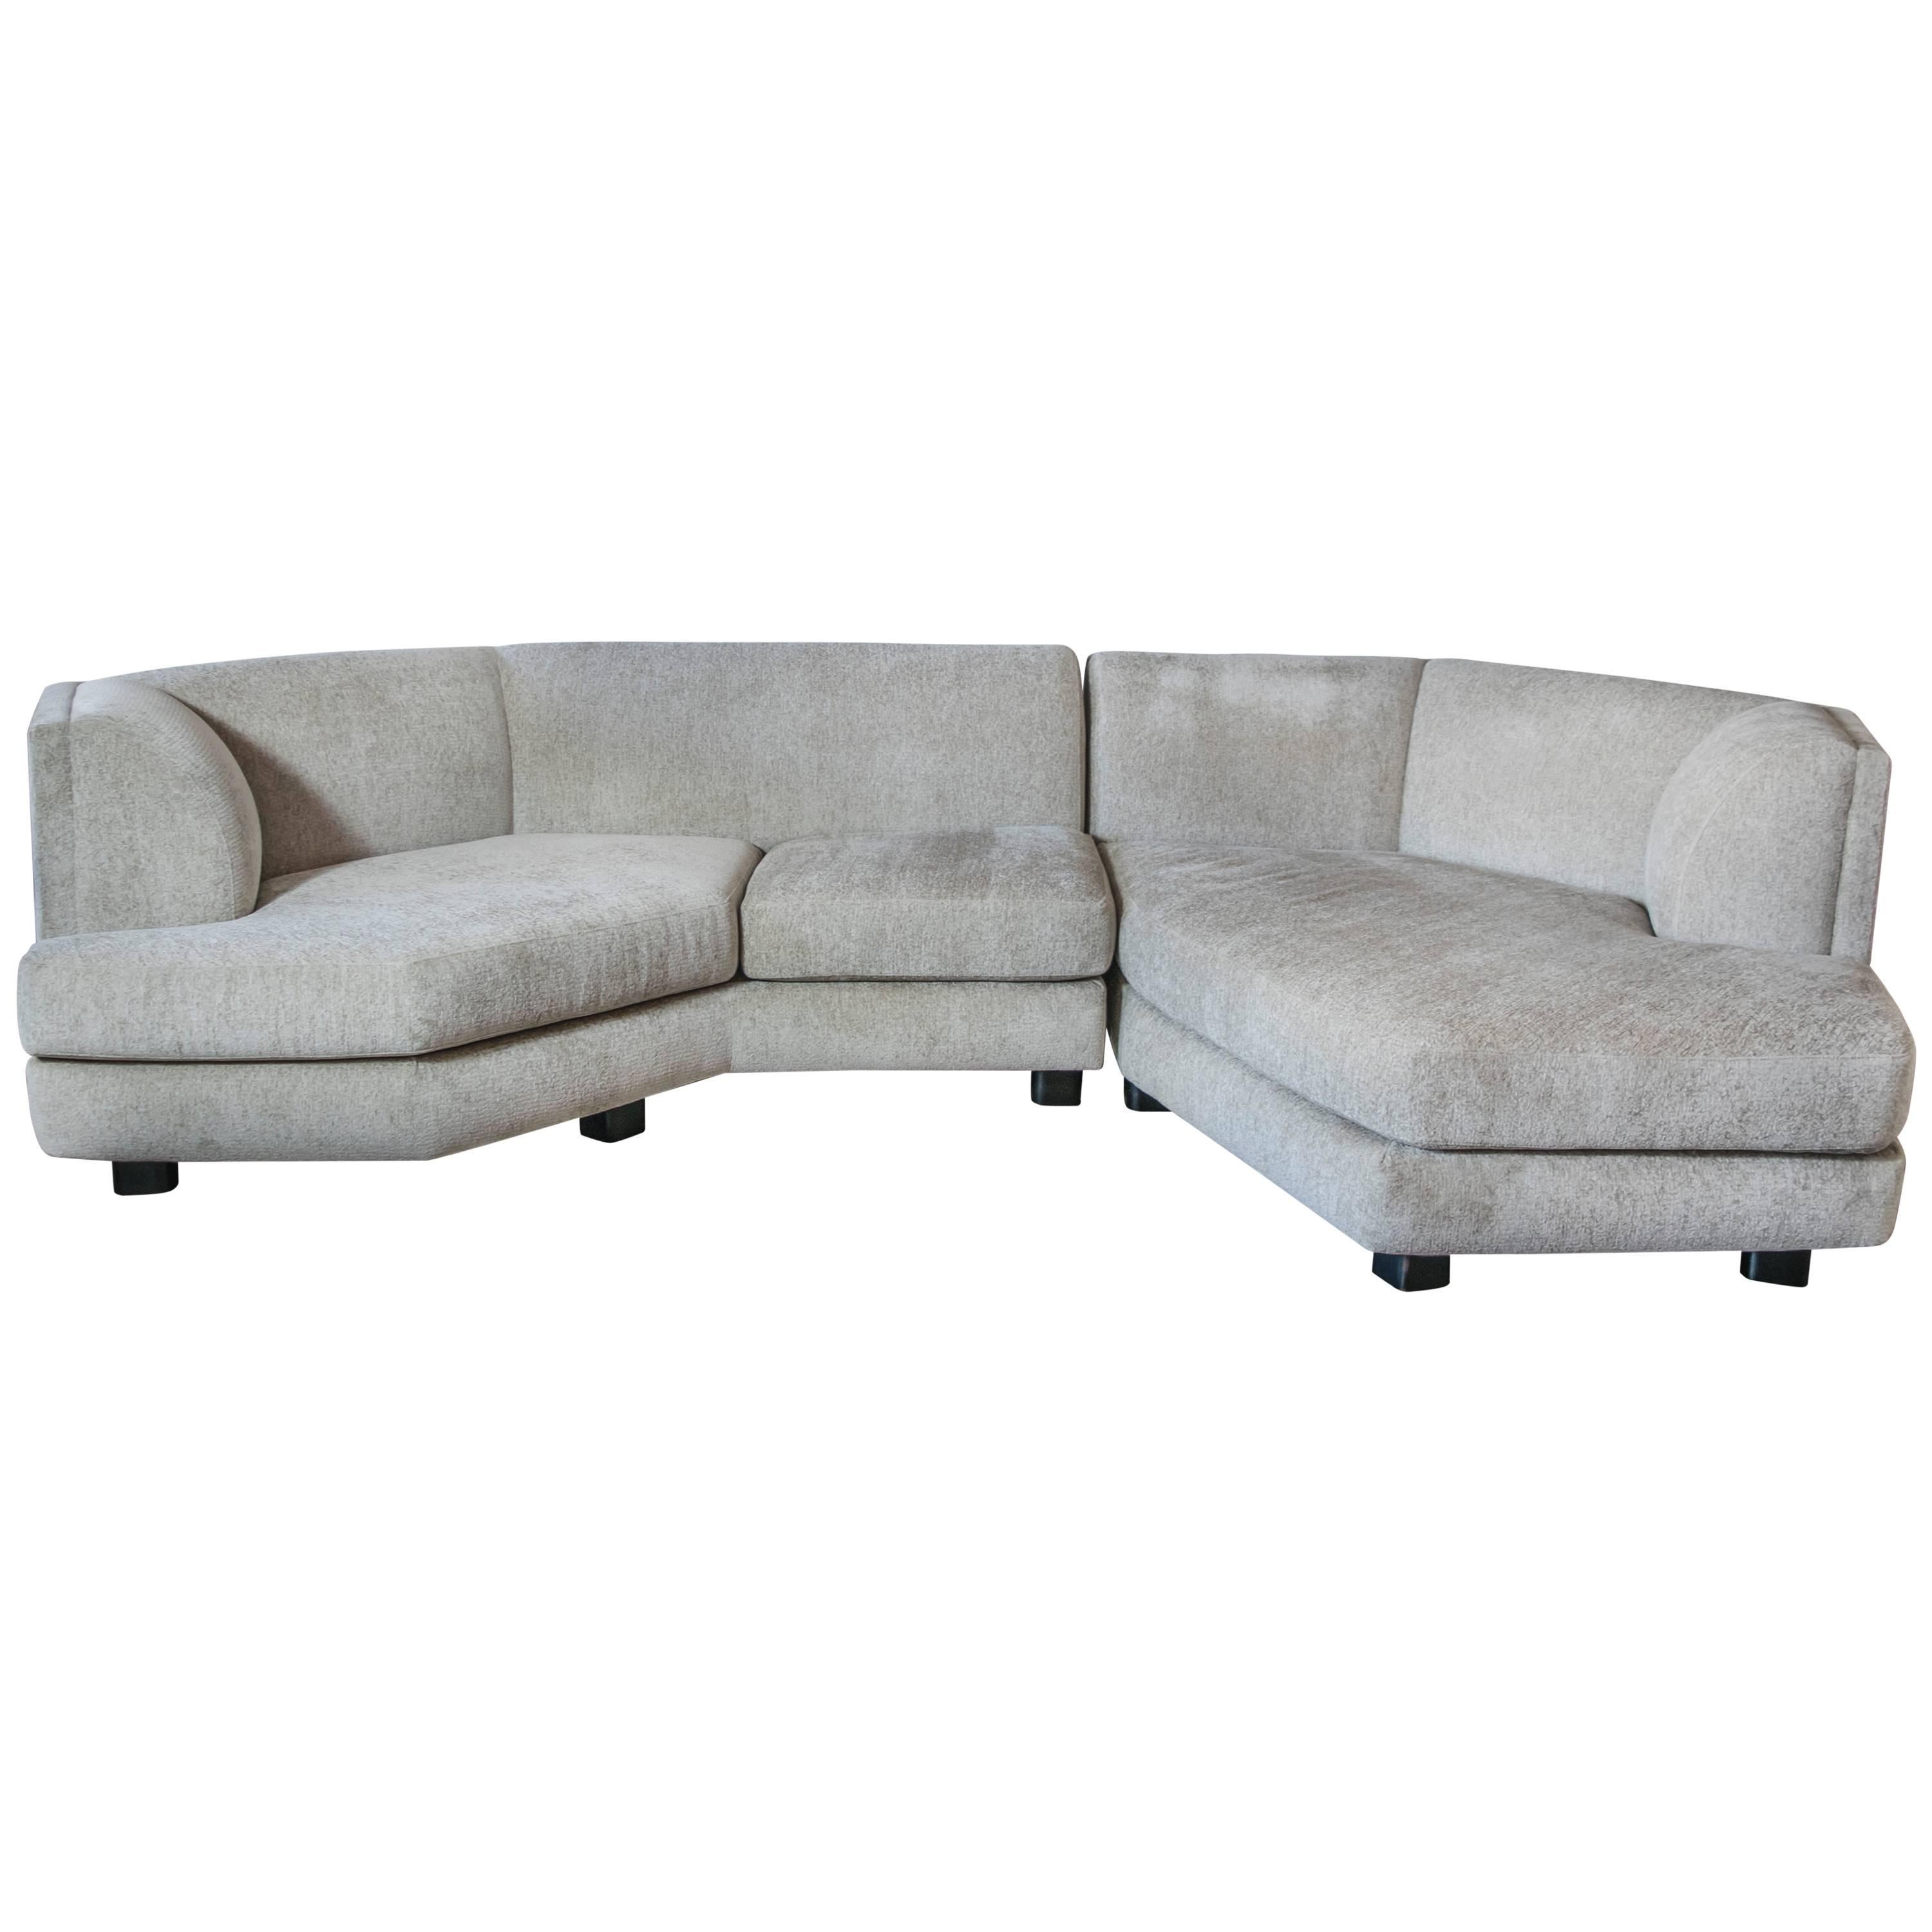 This is a gorgeous and what appears to be, custom Milo Baughman for Thayer Coggin (tags attached) two-piece sectional, recently upholstered in a divine oatmeal colored chenille. This couch is extremely stylish and comfortable, perfect for the entire